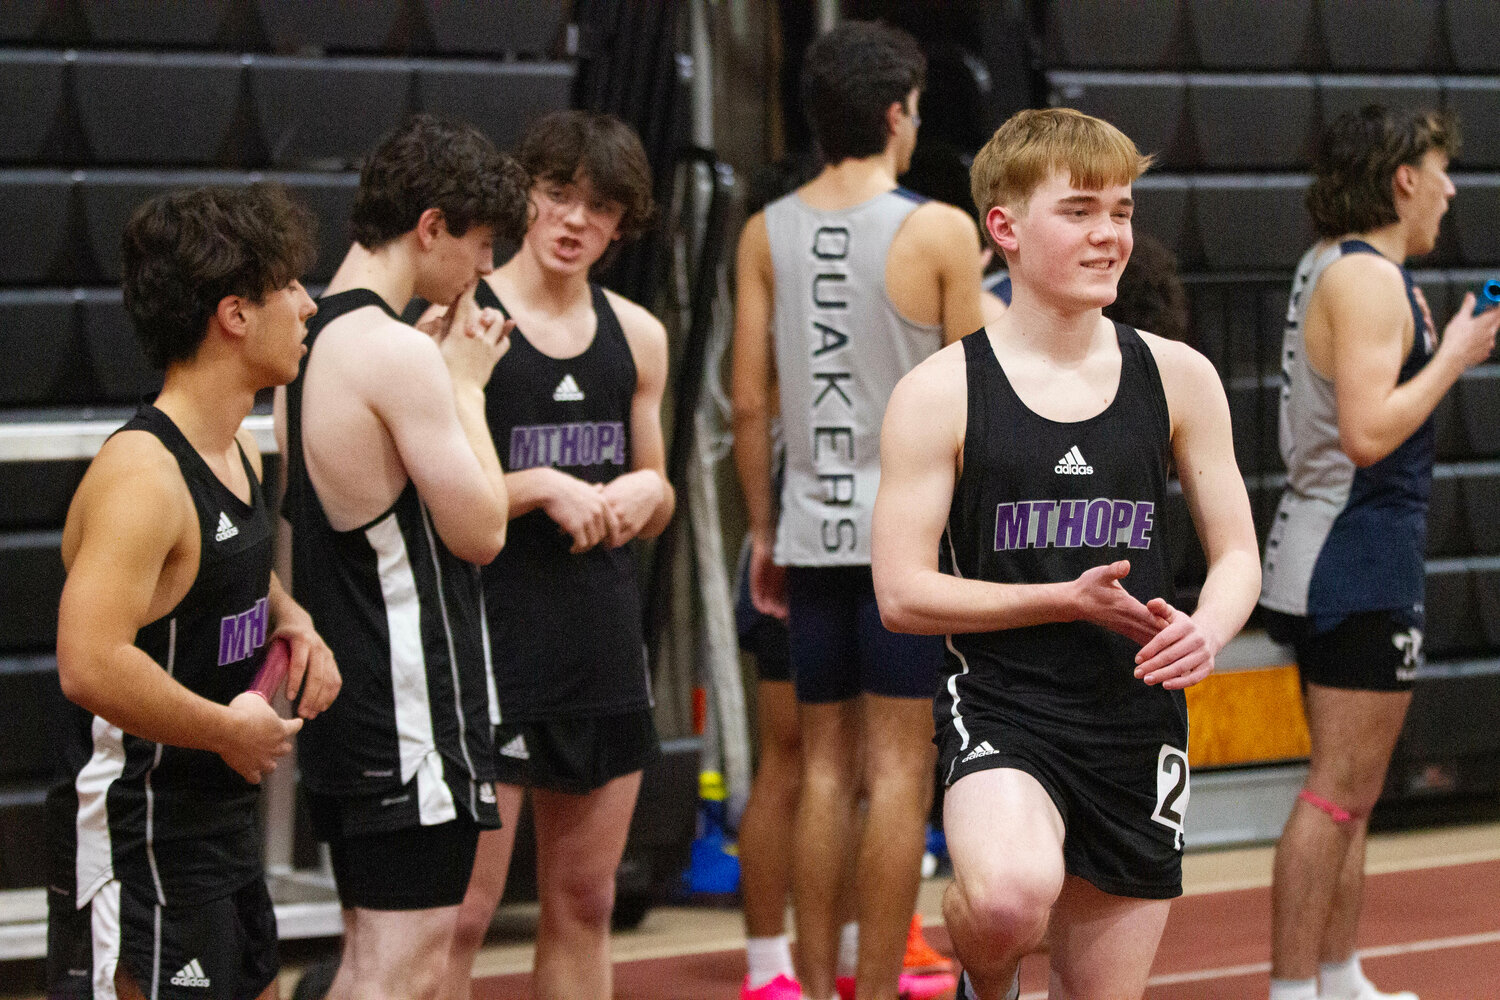 Logan Toste (left) Tyler Scarborough (right) and their teammates prepare for the 4x200 meter relay race.